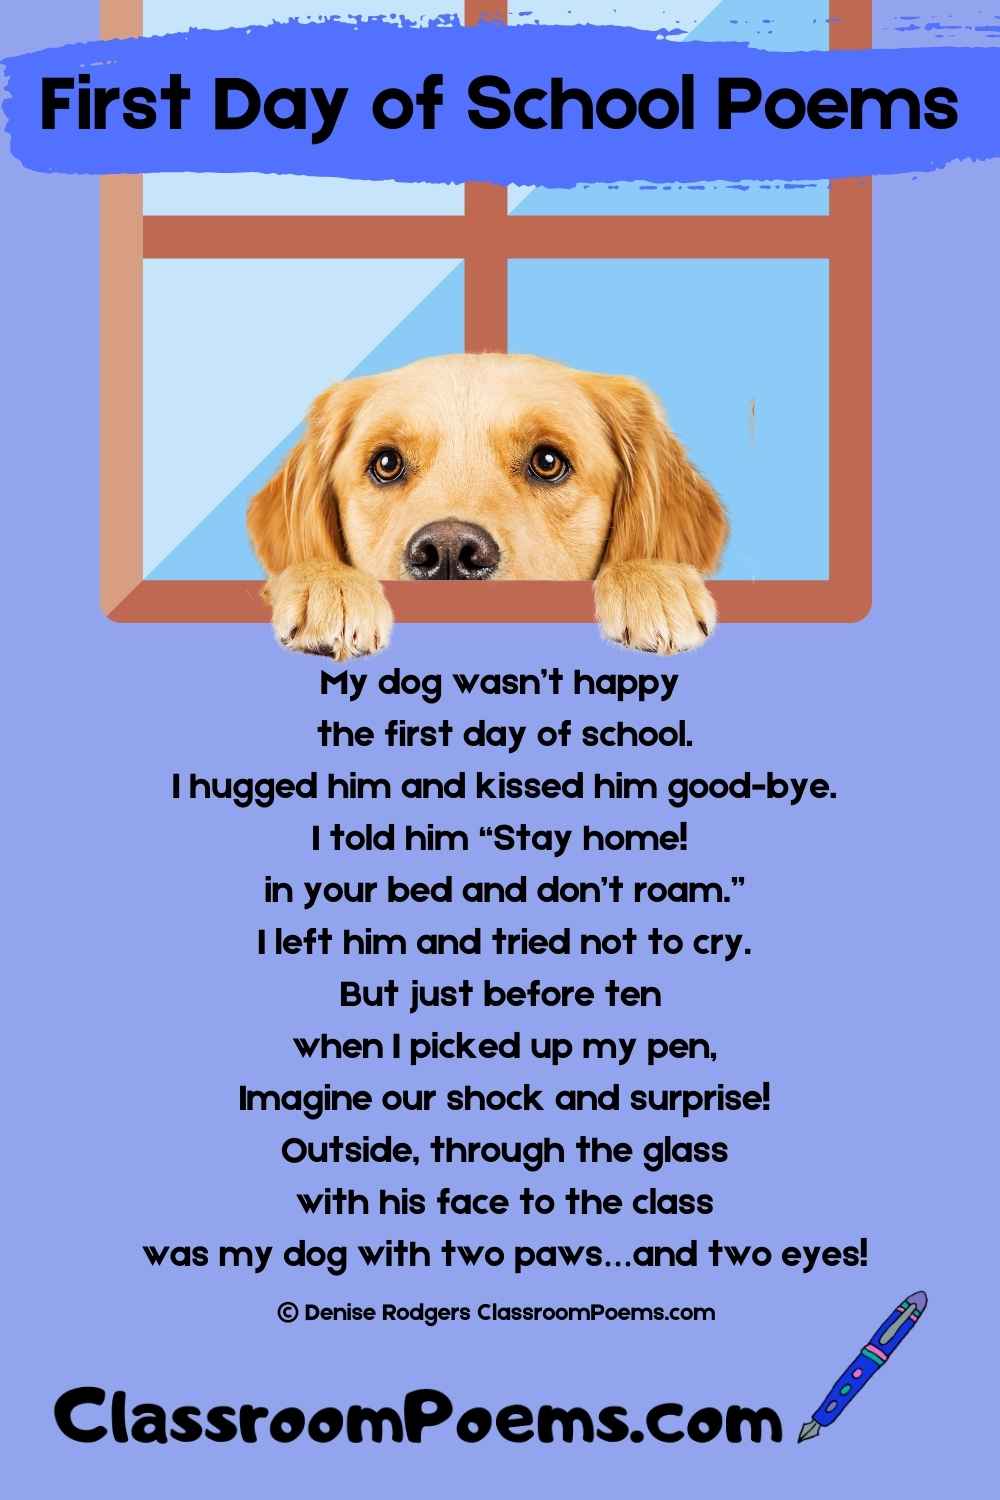 First Day of School Poems